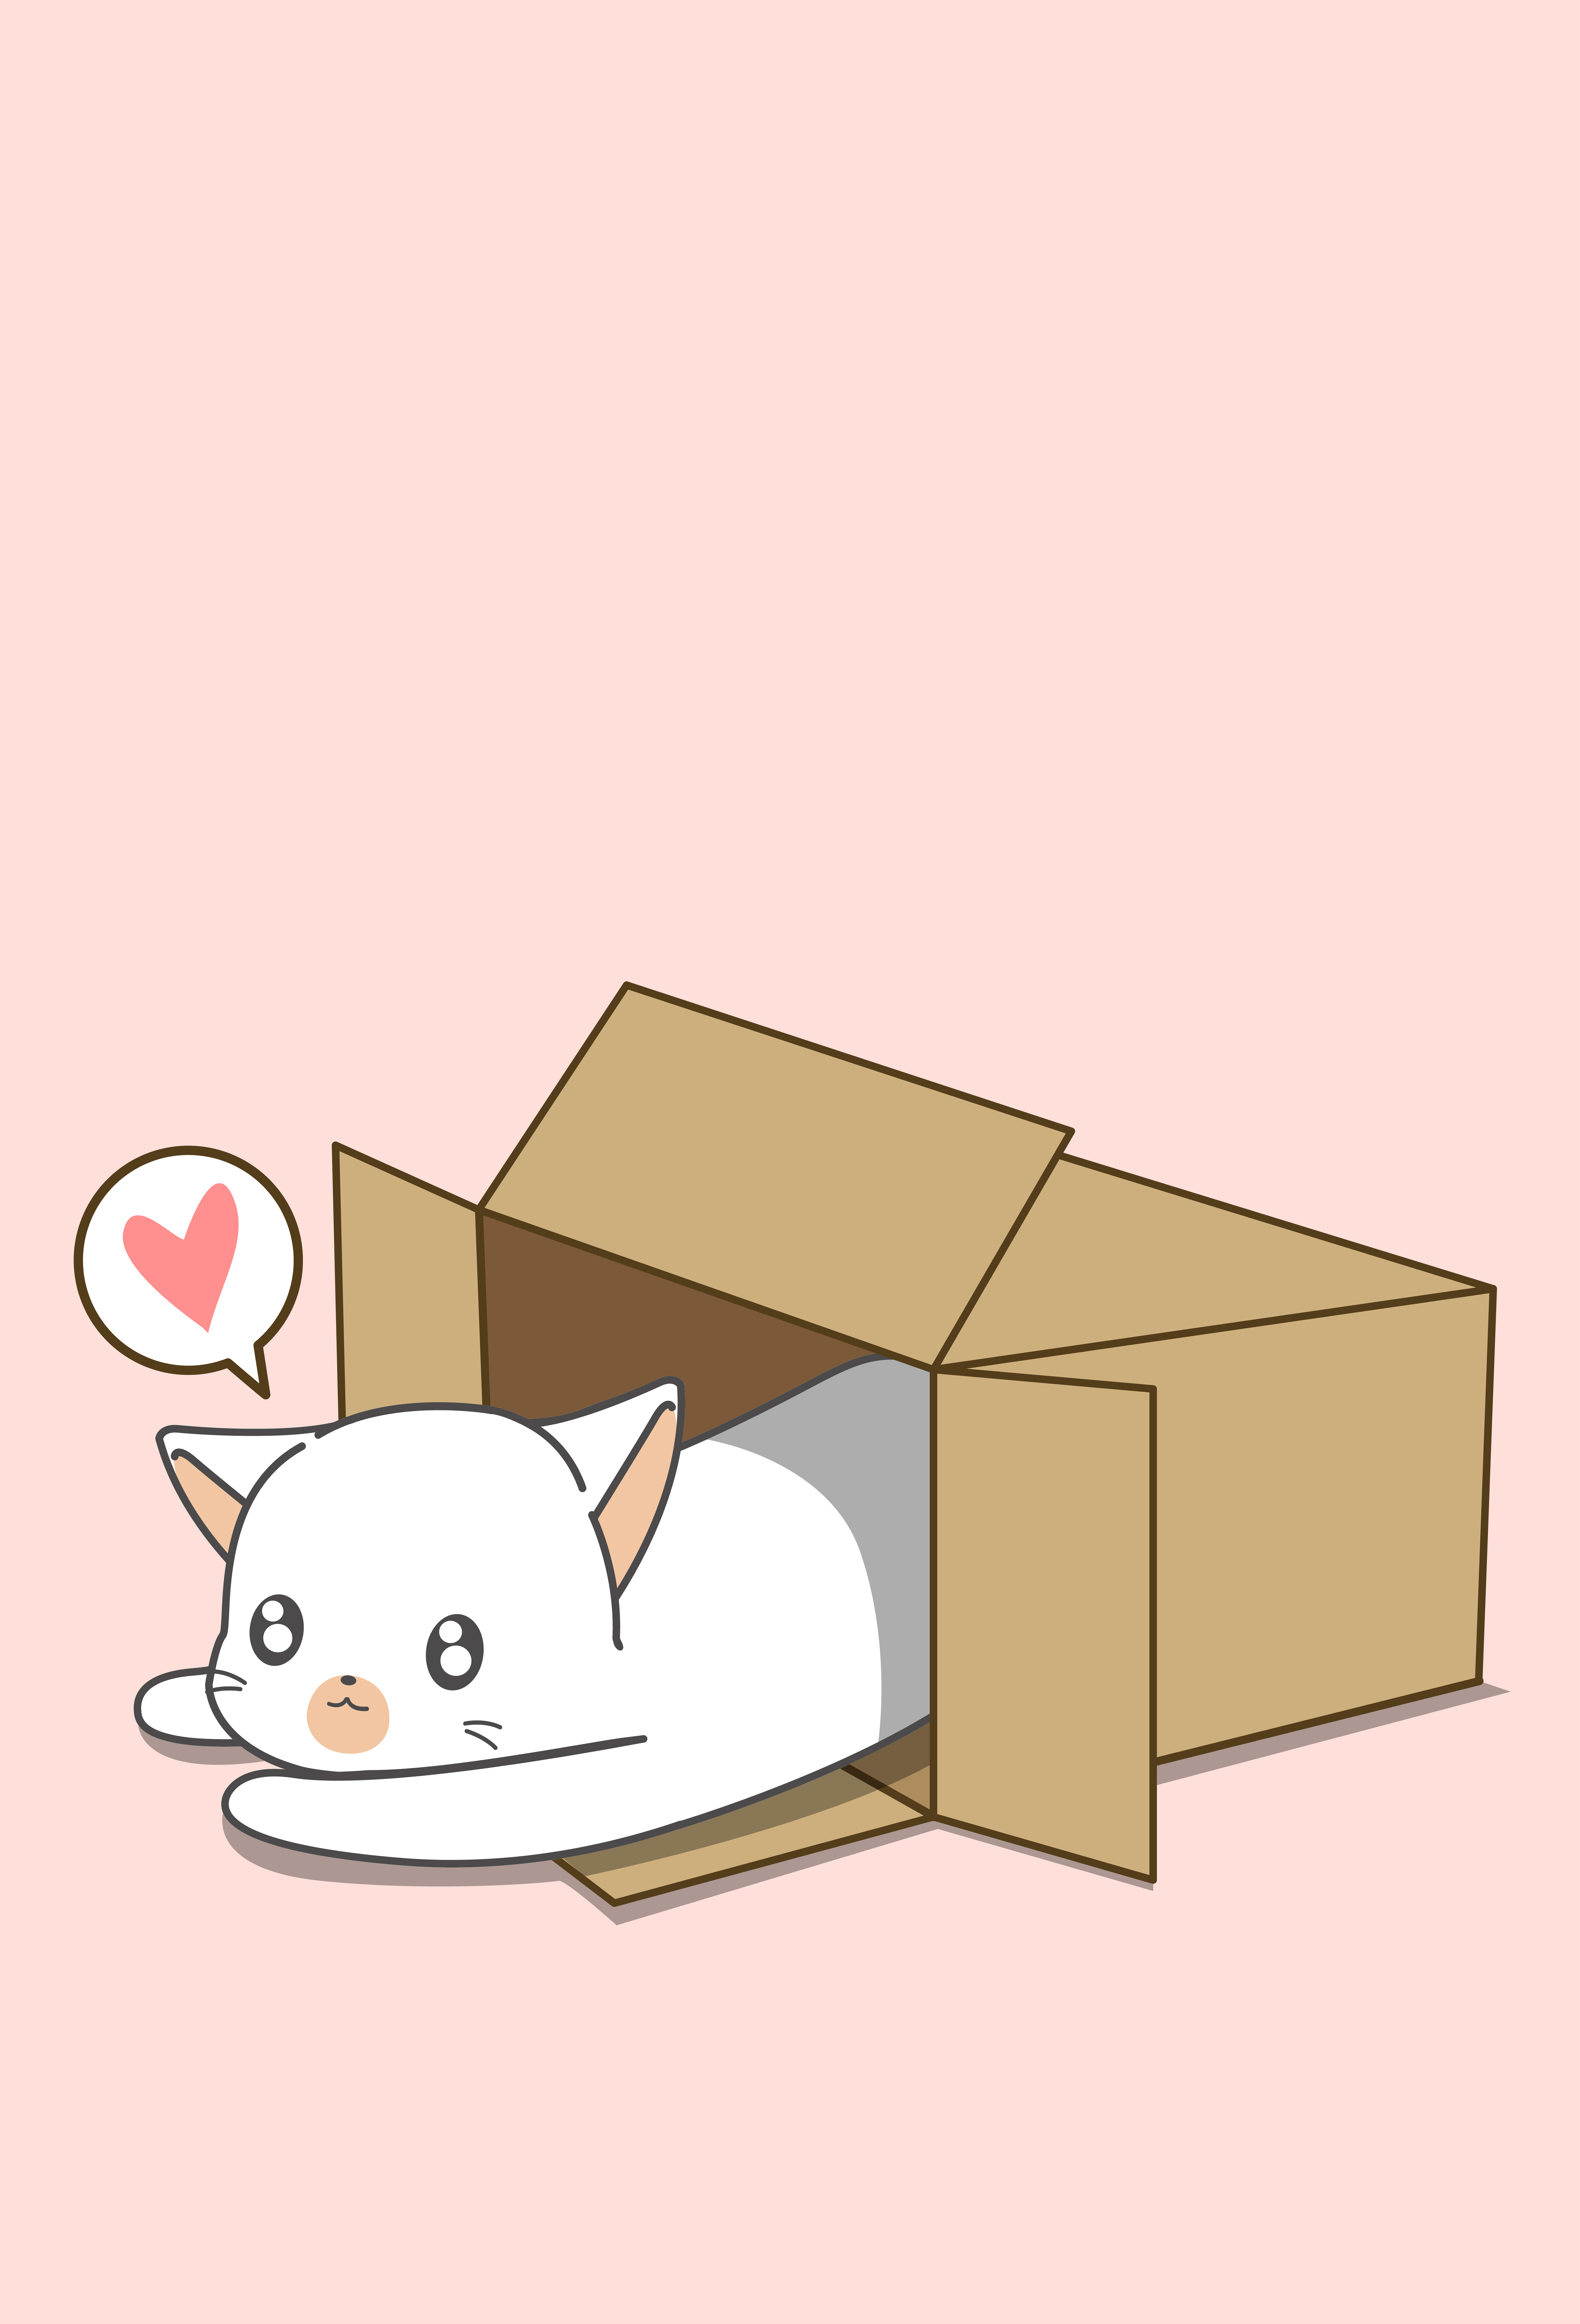 Little White Cat In Box In Cartoon Style Download Free Vectors Clipart Graphics Vector Art